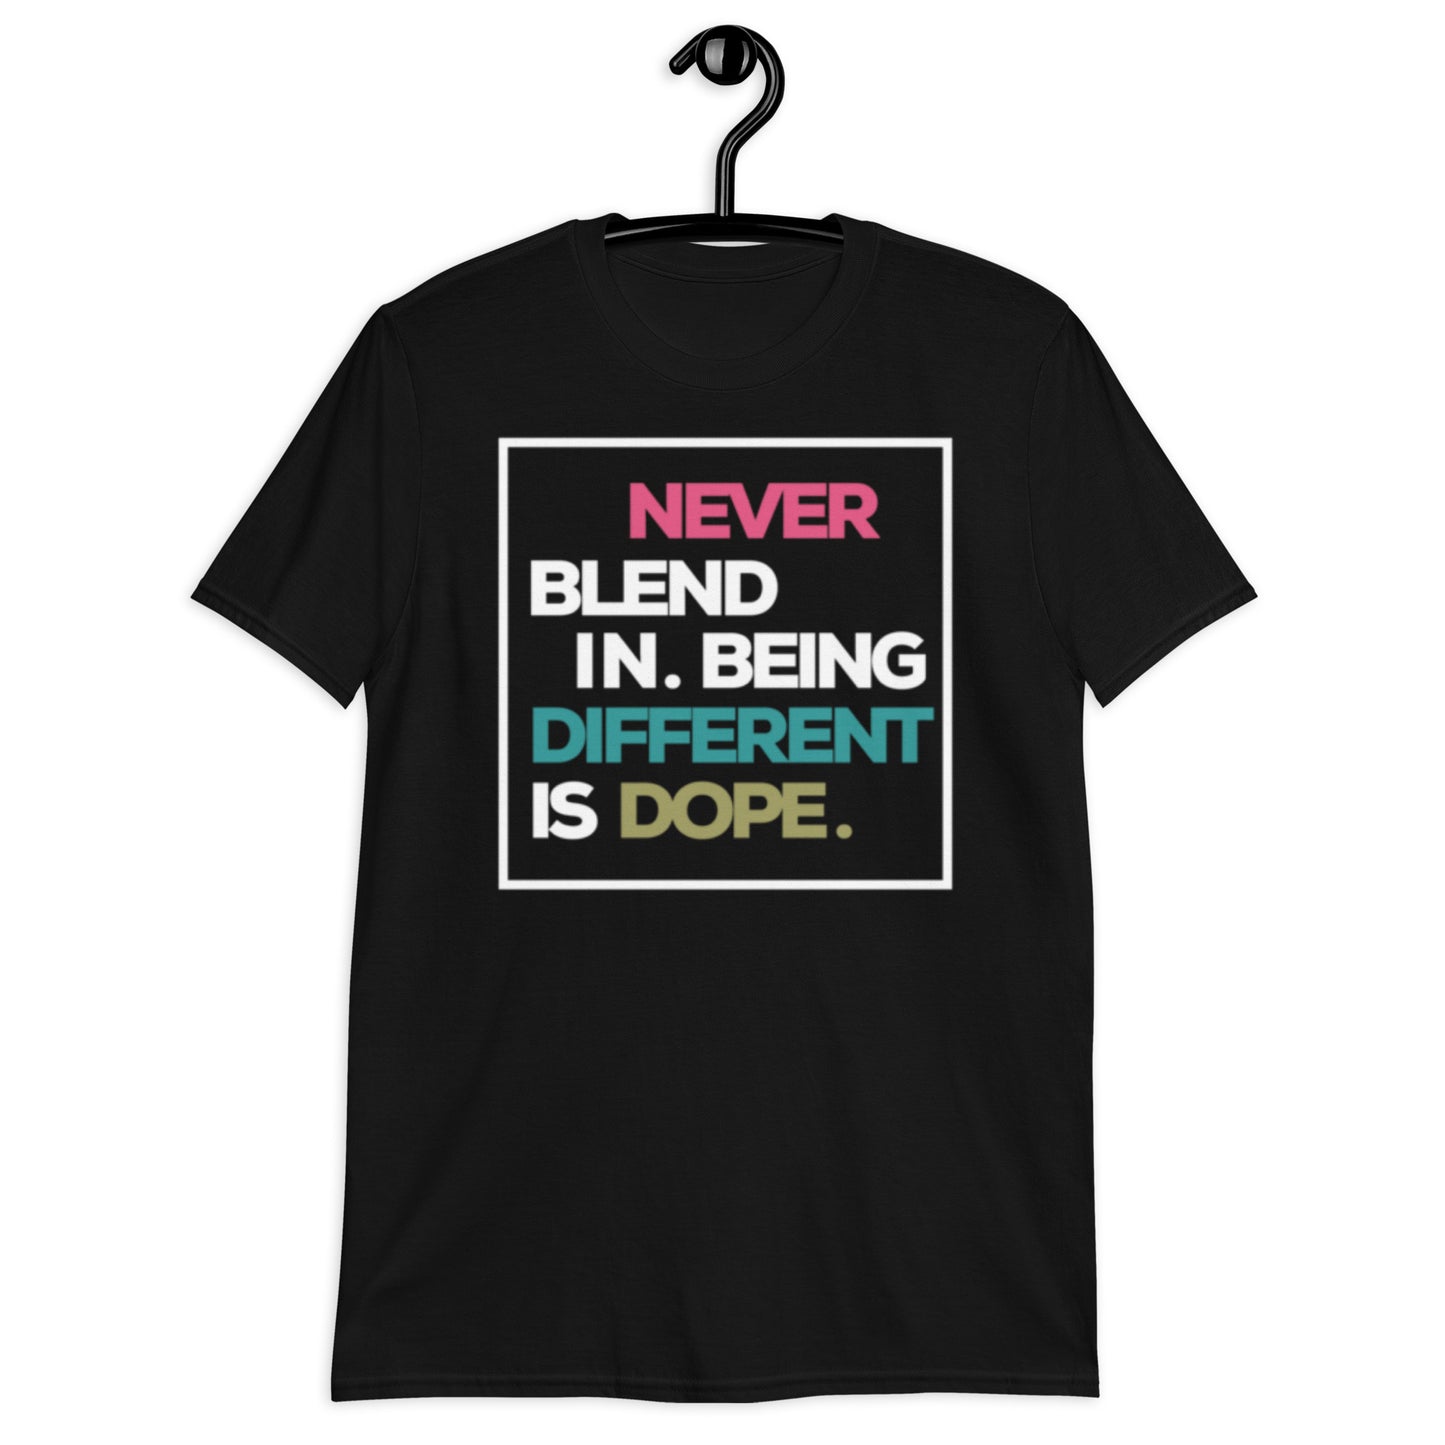 Different is Dope - Short-Sleeve Unisex T-Shirt